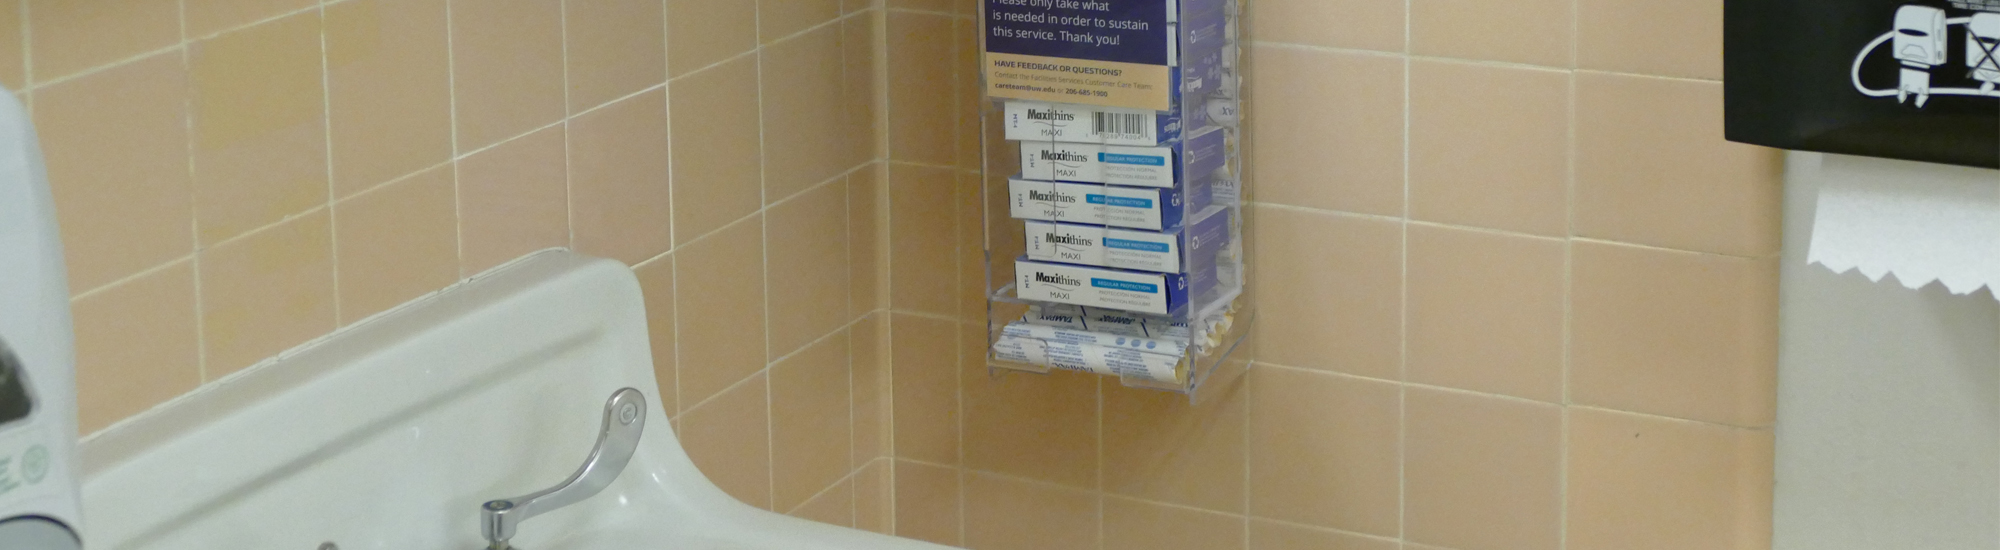 A clear acrylic dispenser affixed to a tiled wall holds individually-wrapped tampons and pads